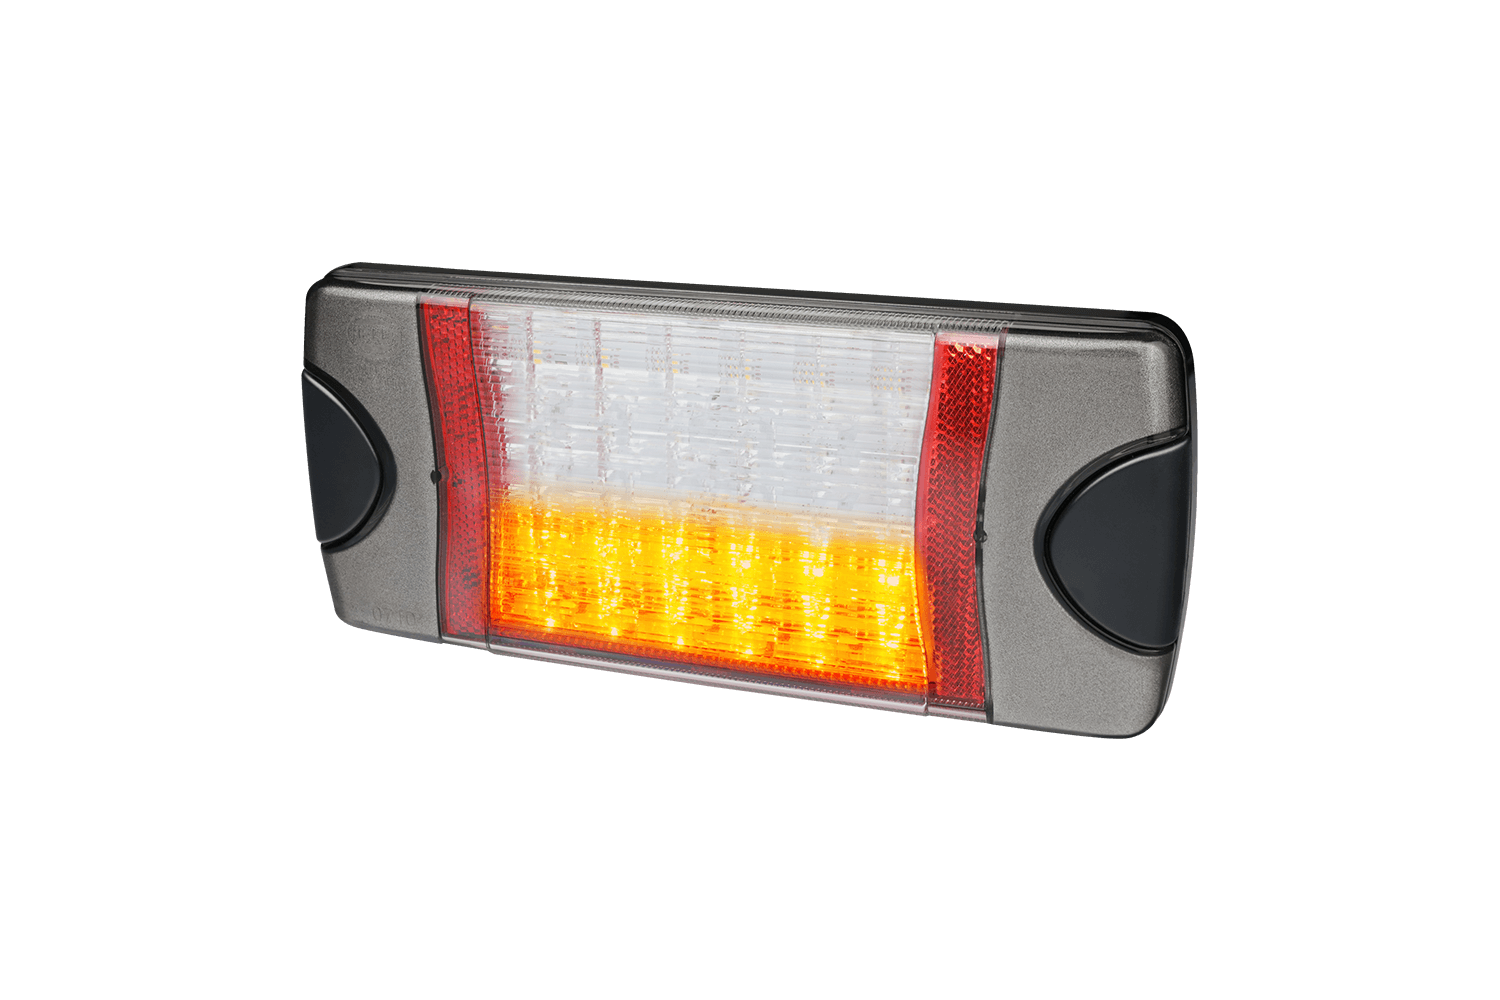 DuraLED Combi LED rear lamp, multi-function lamp from Hella offered by Patlon